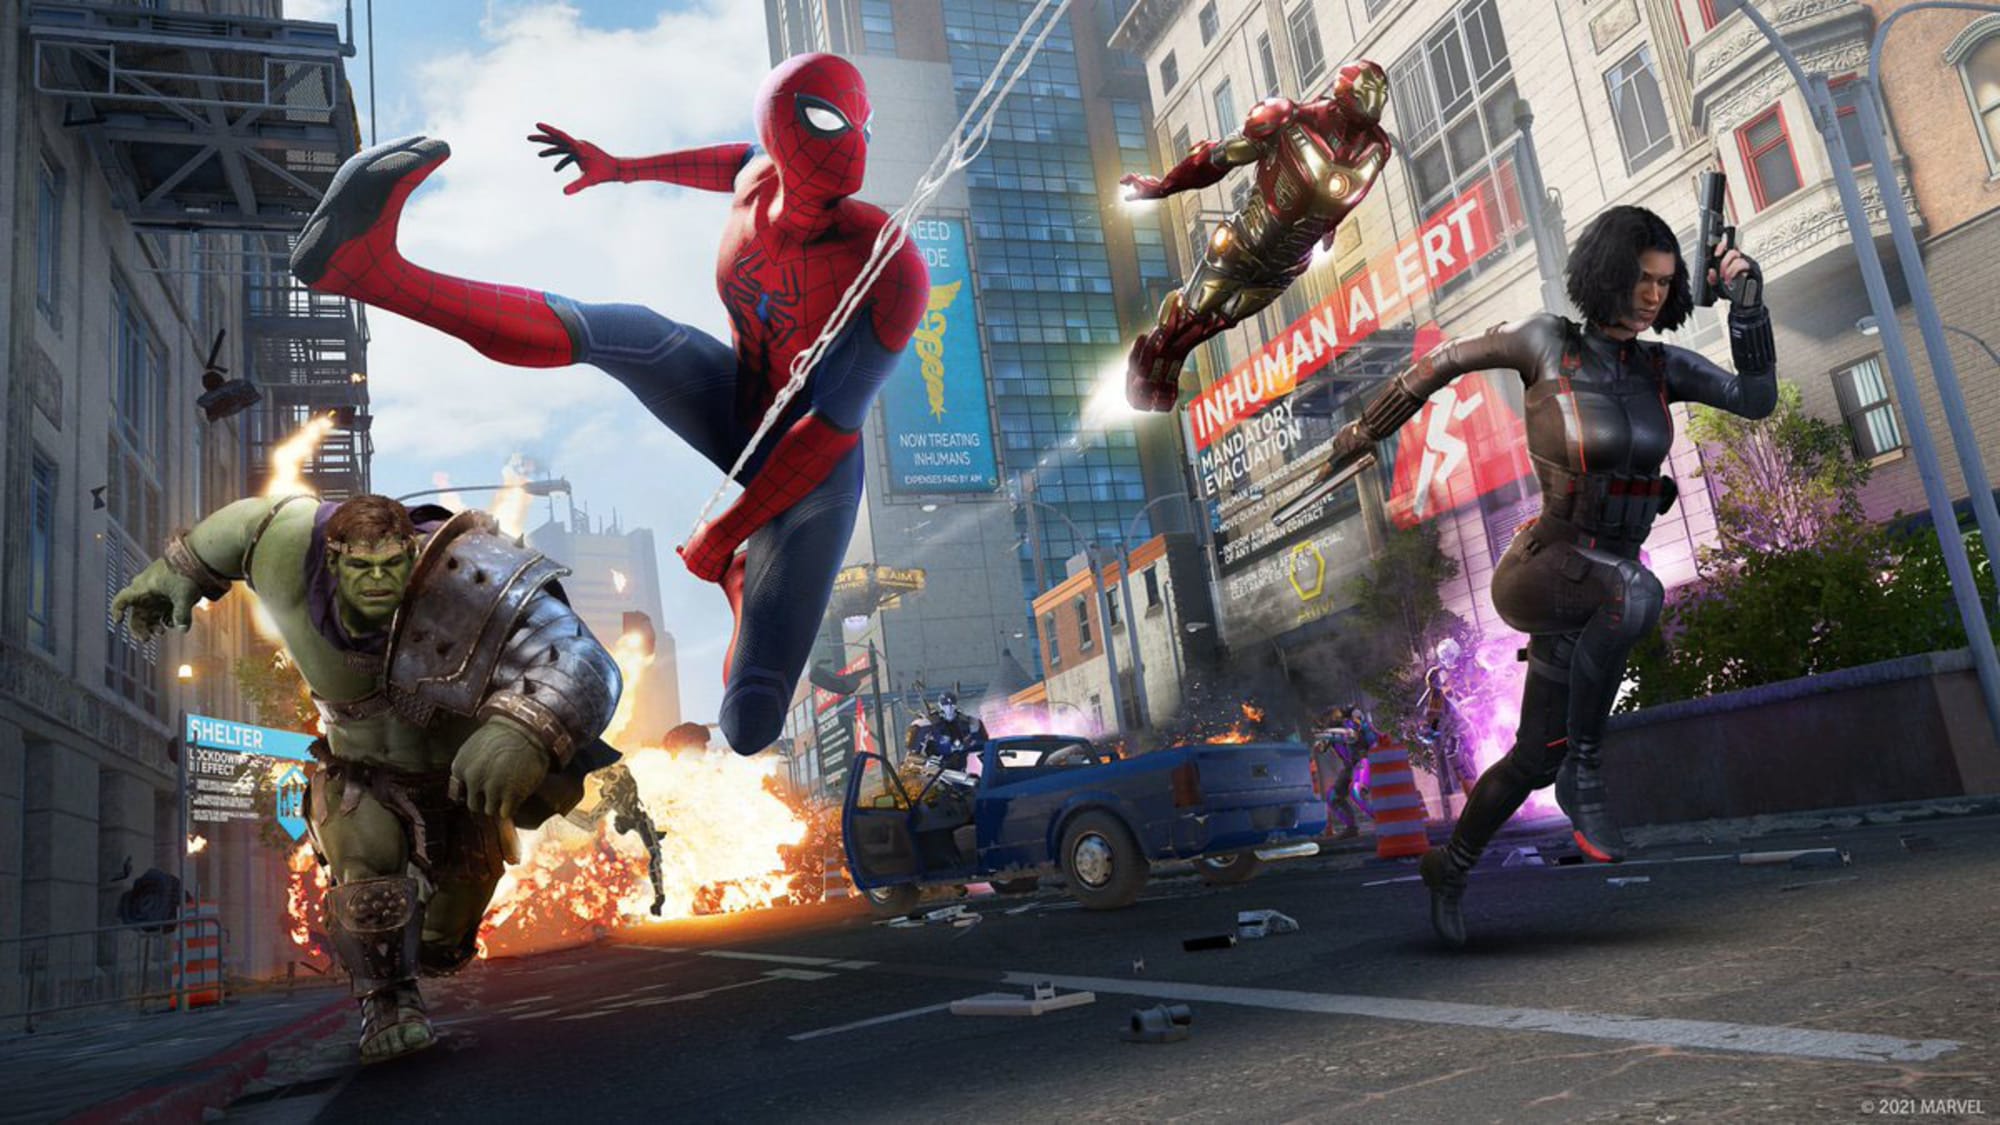 Effectief Blauwdruk Conflict Marvel's Avengers: Is Spider-Man coming to Xbox or PC?